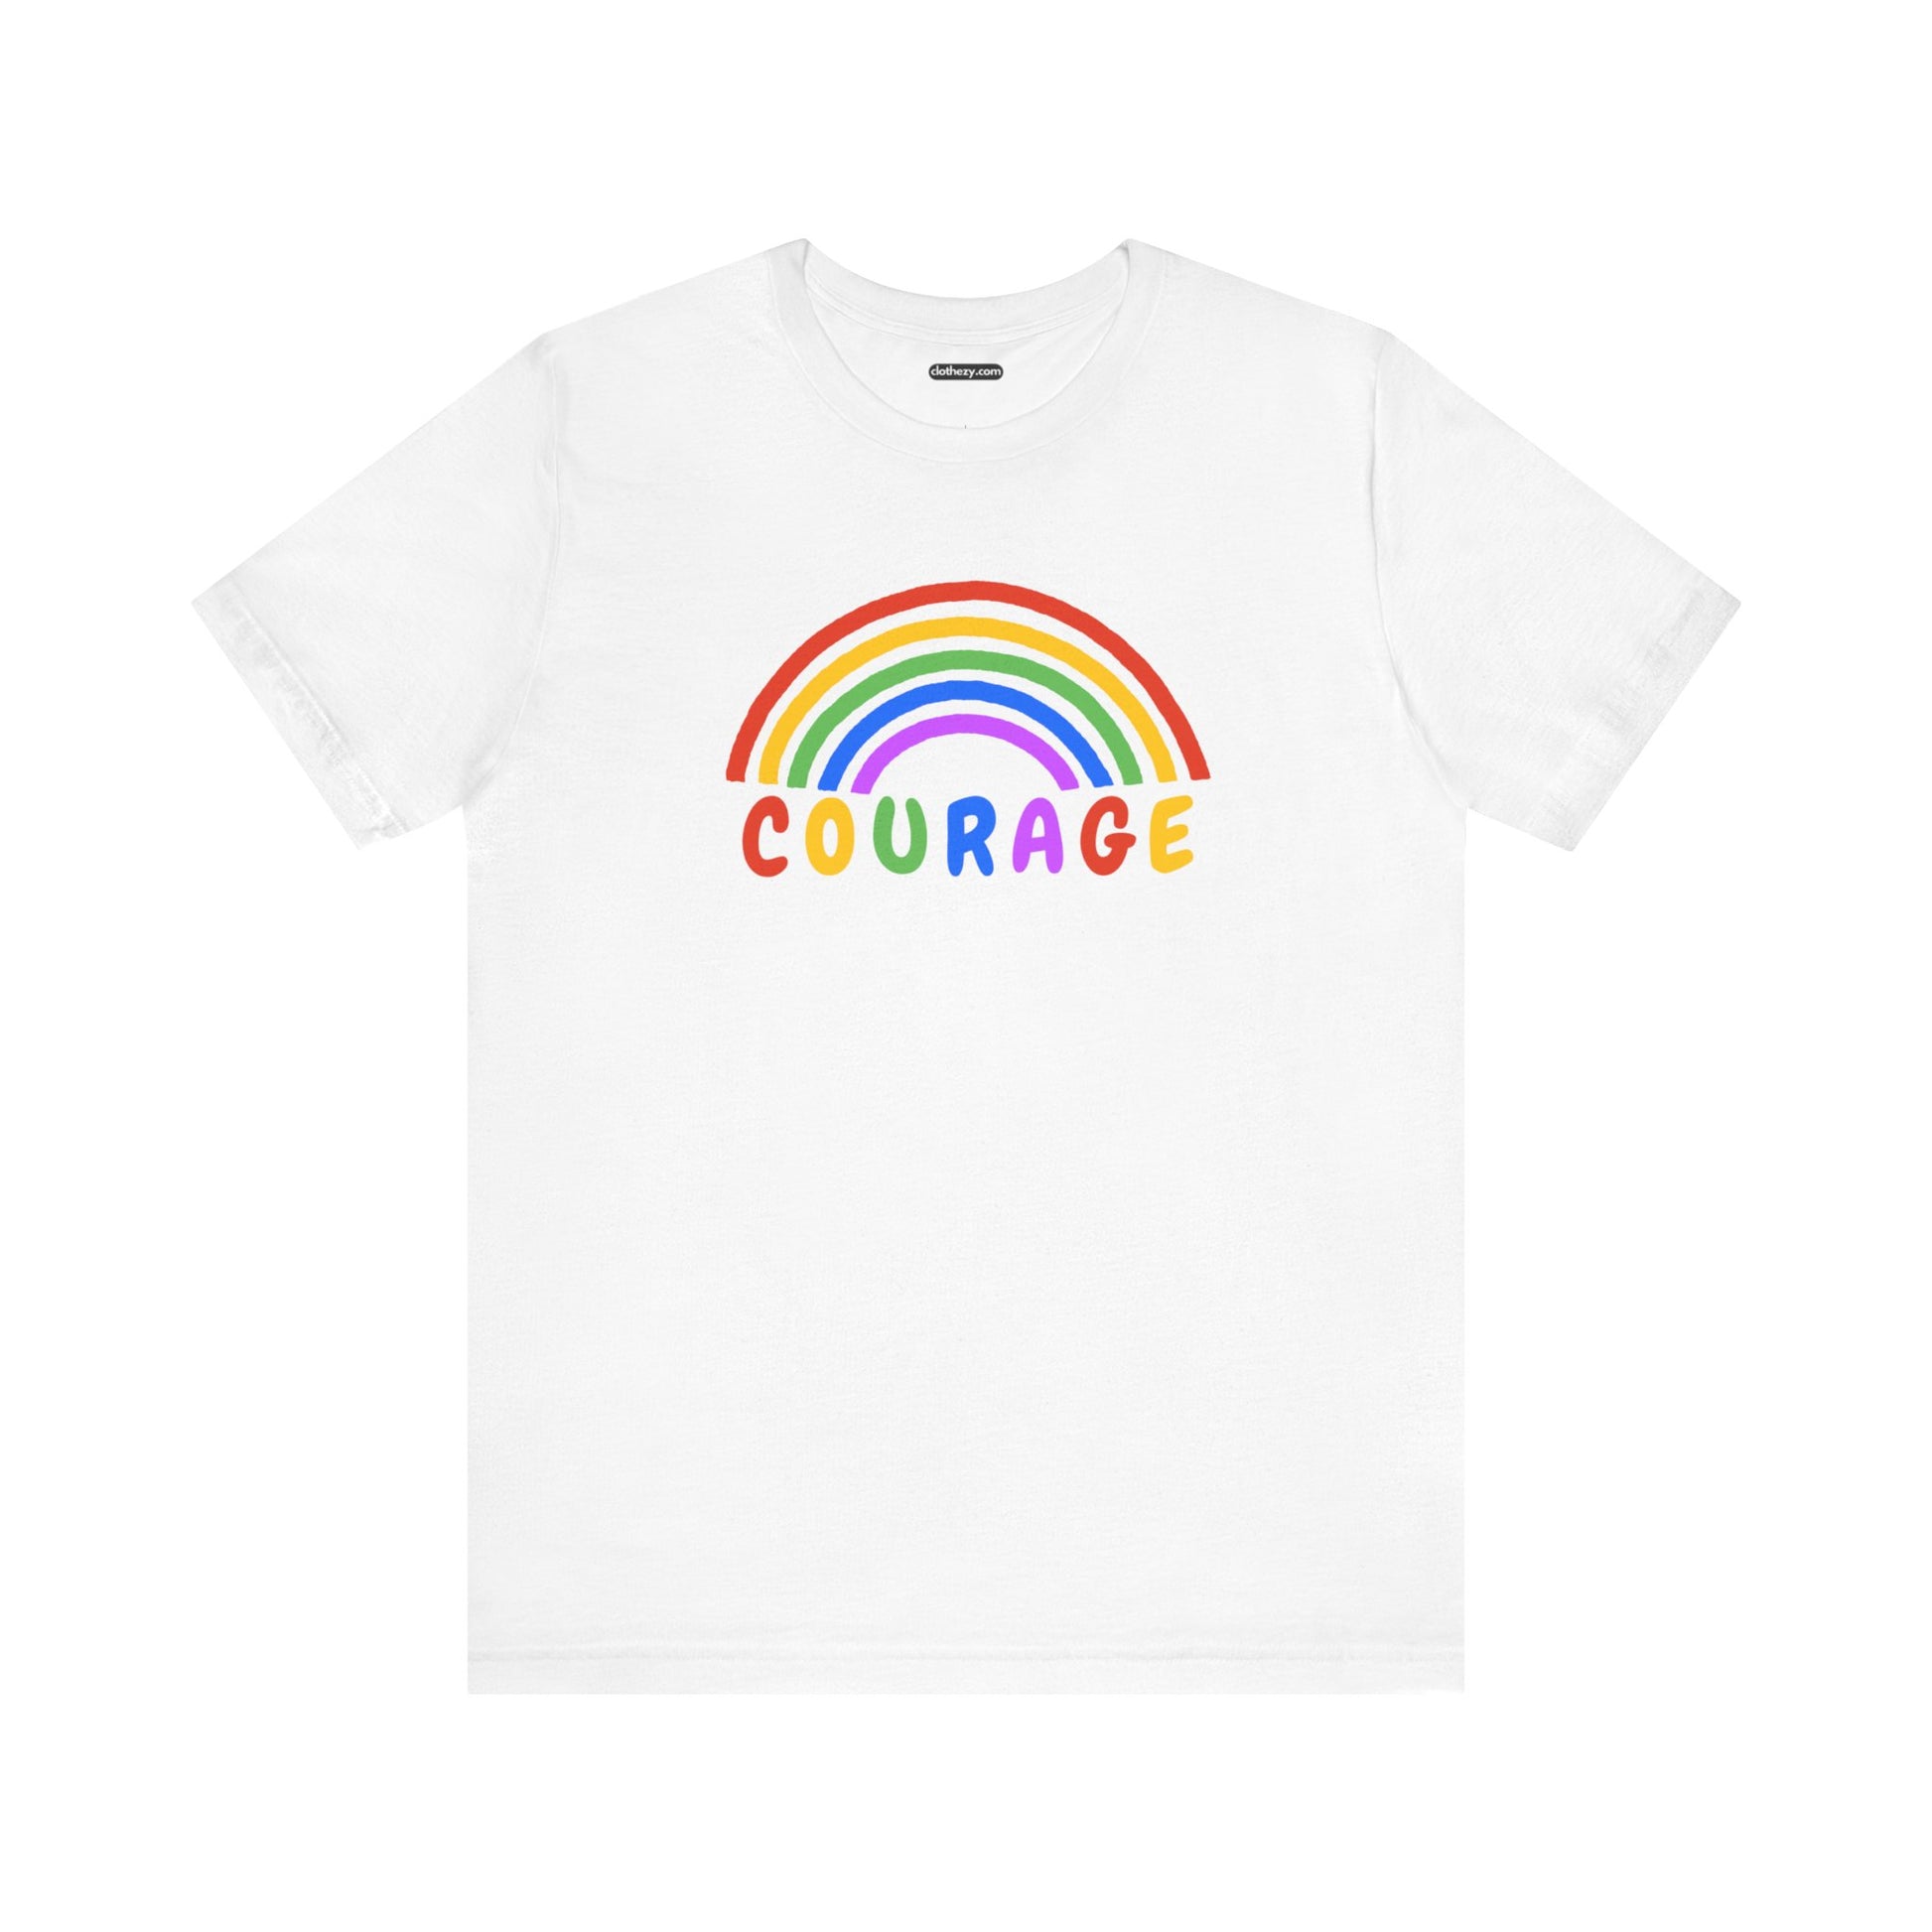 Rainbow Courage - Soft Cotton Adult Unisex T-Shirt, Gift for friends and family, Gift for friends and family by clothezy.com - Buy Now